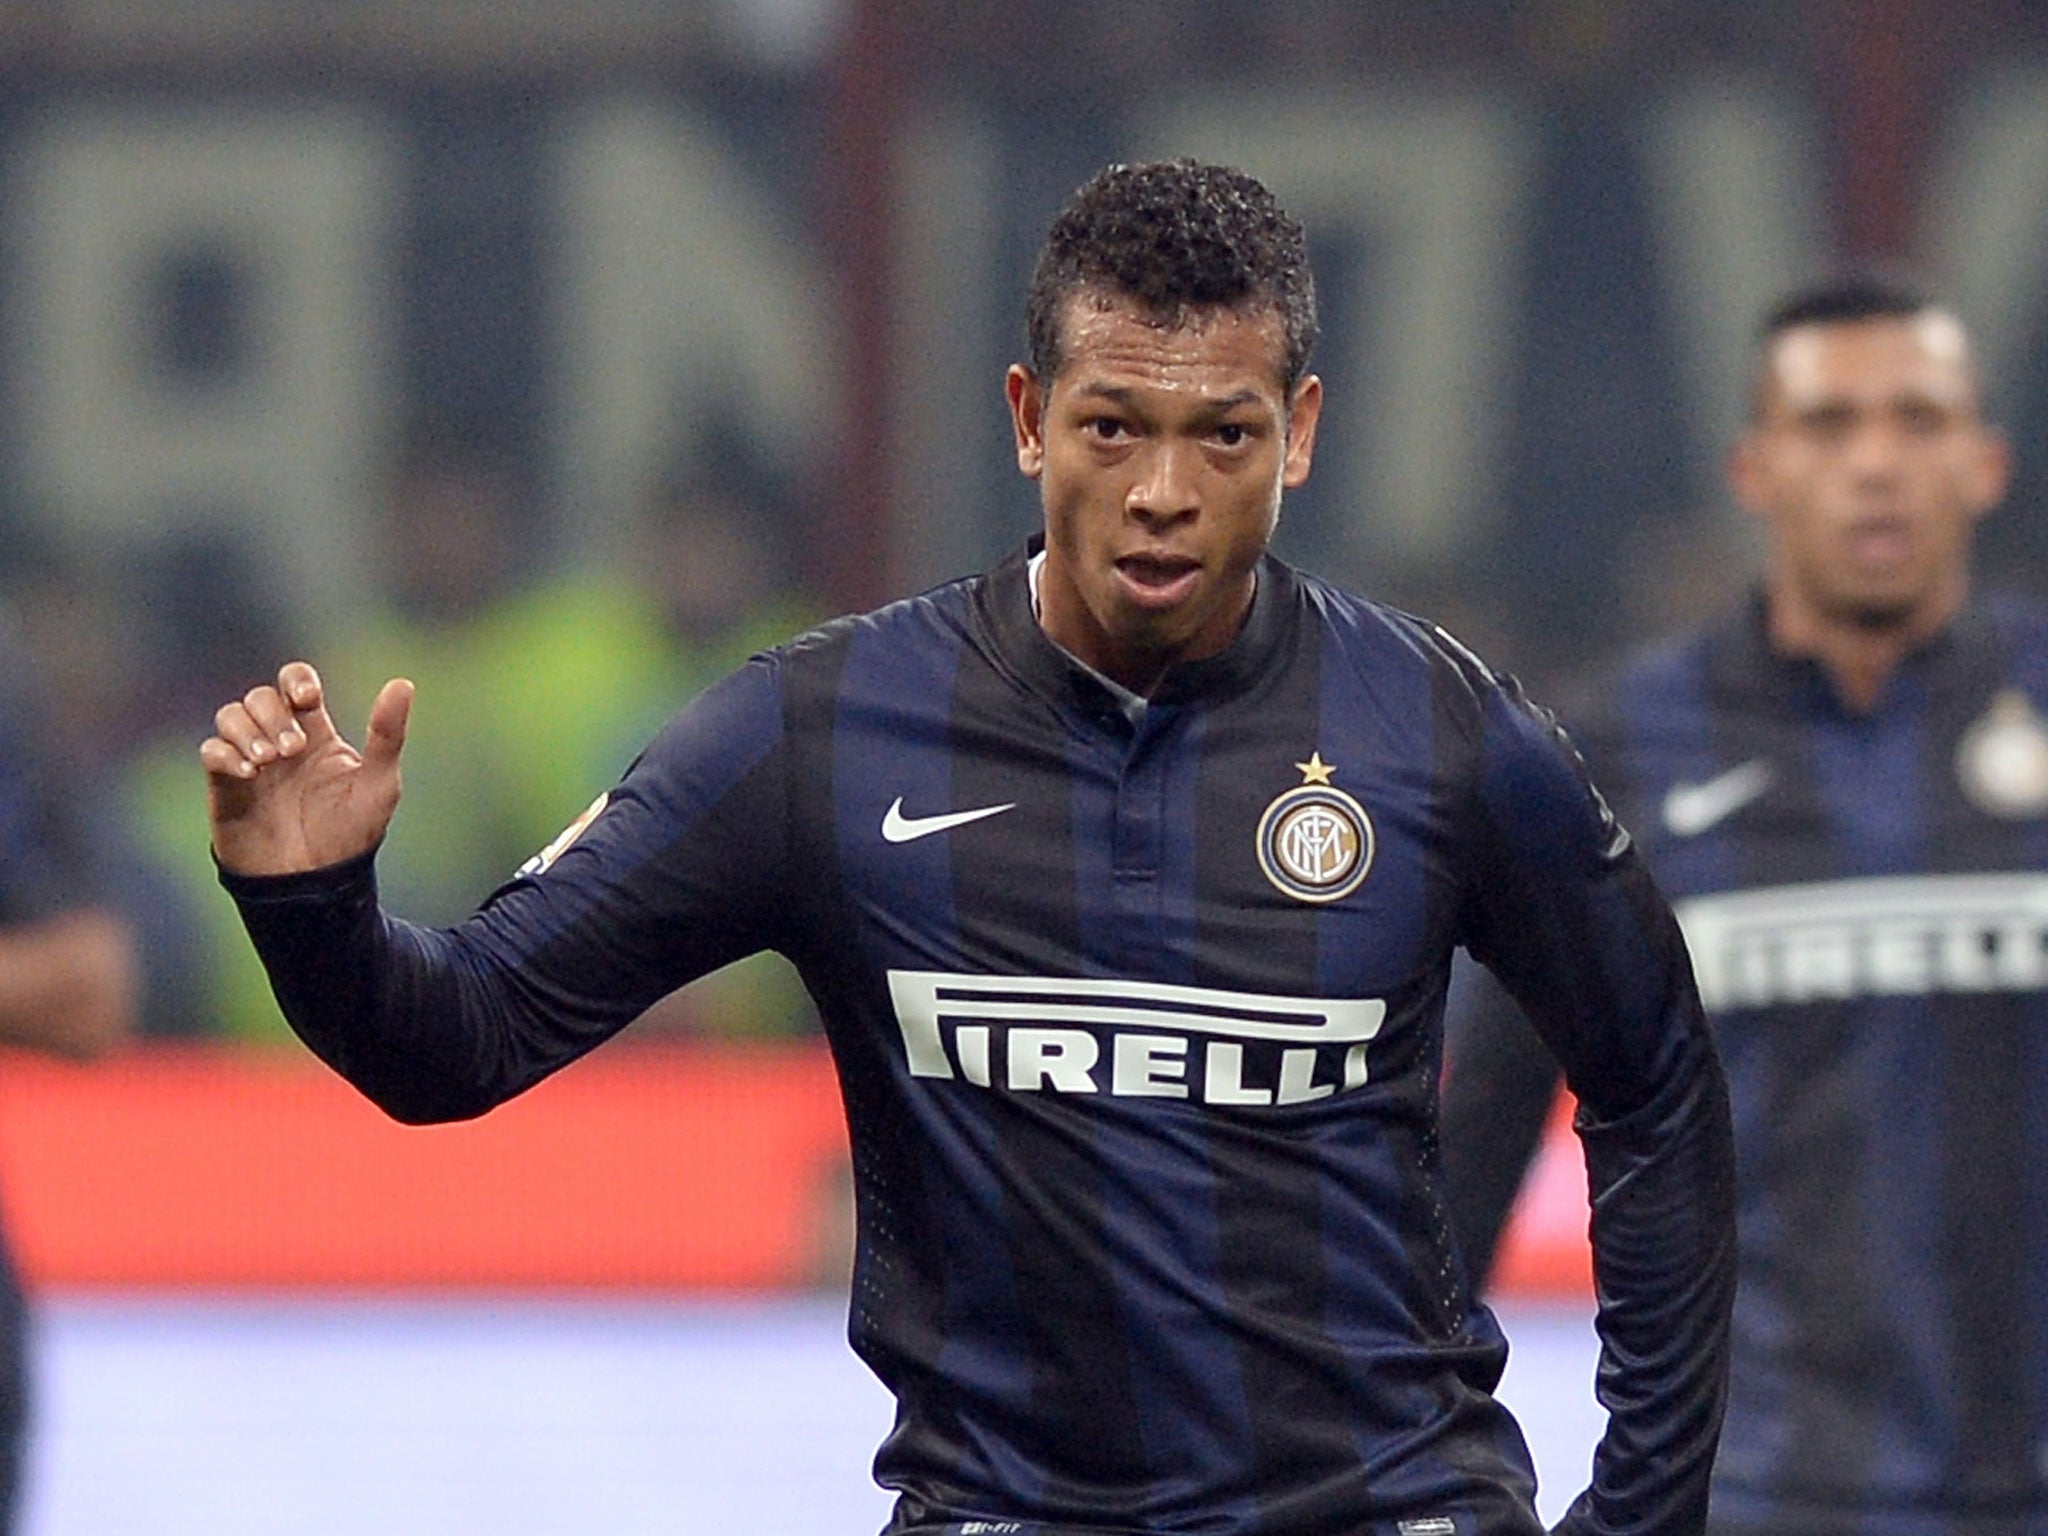 Chelsea are lining up Fredy Guarin after Mata's departure (Getty Images)